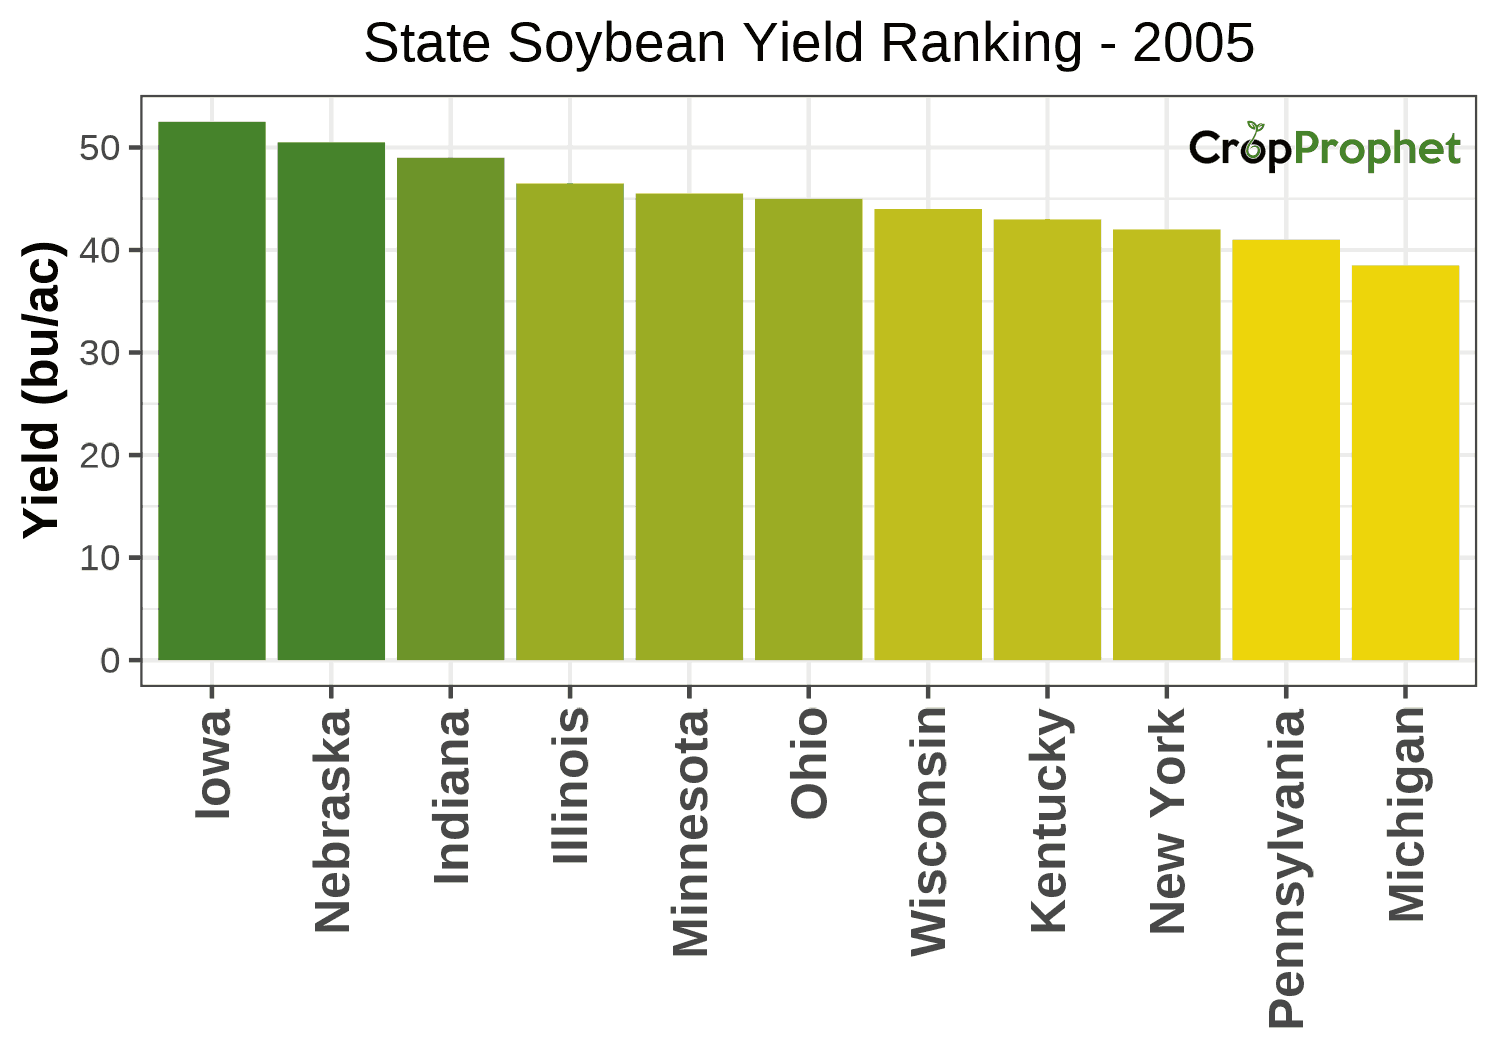 Soybean Production by State - 2005 Rankings